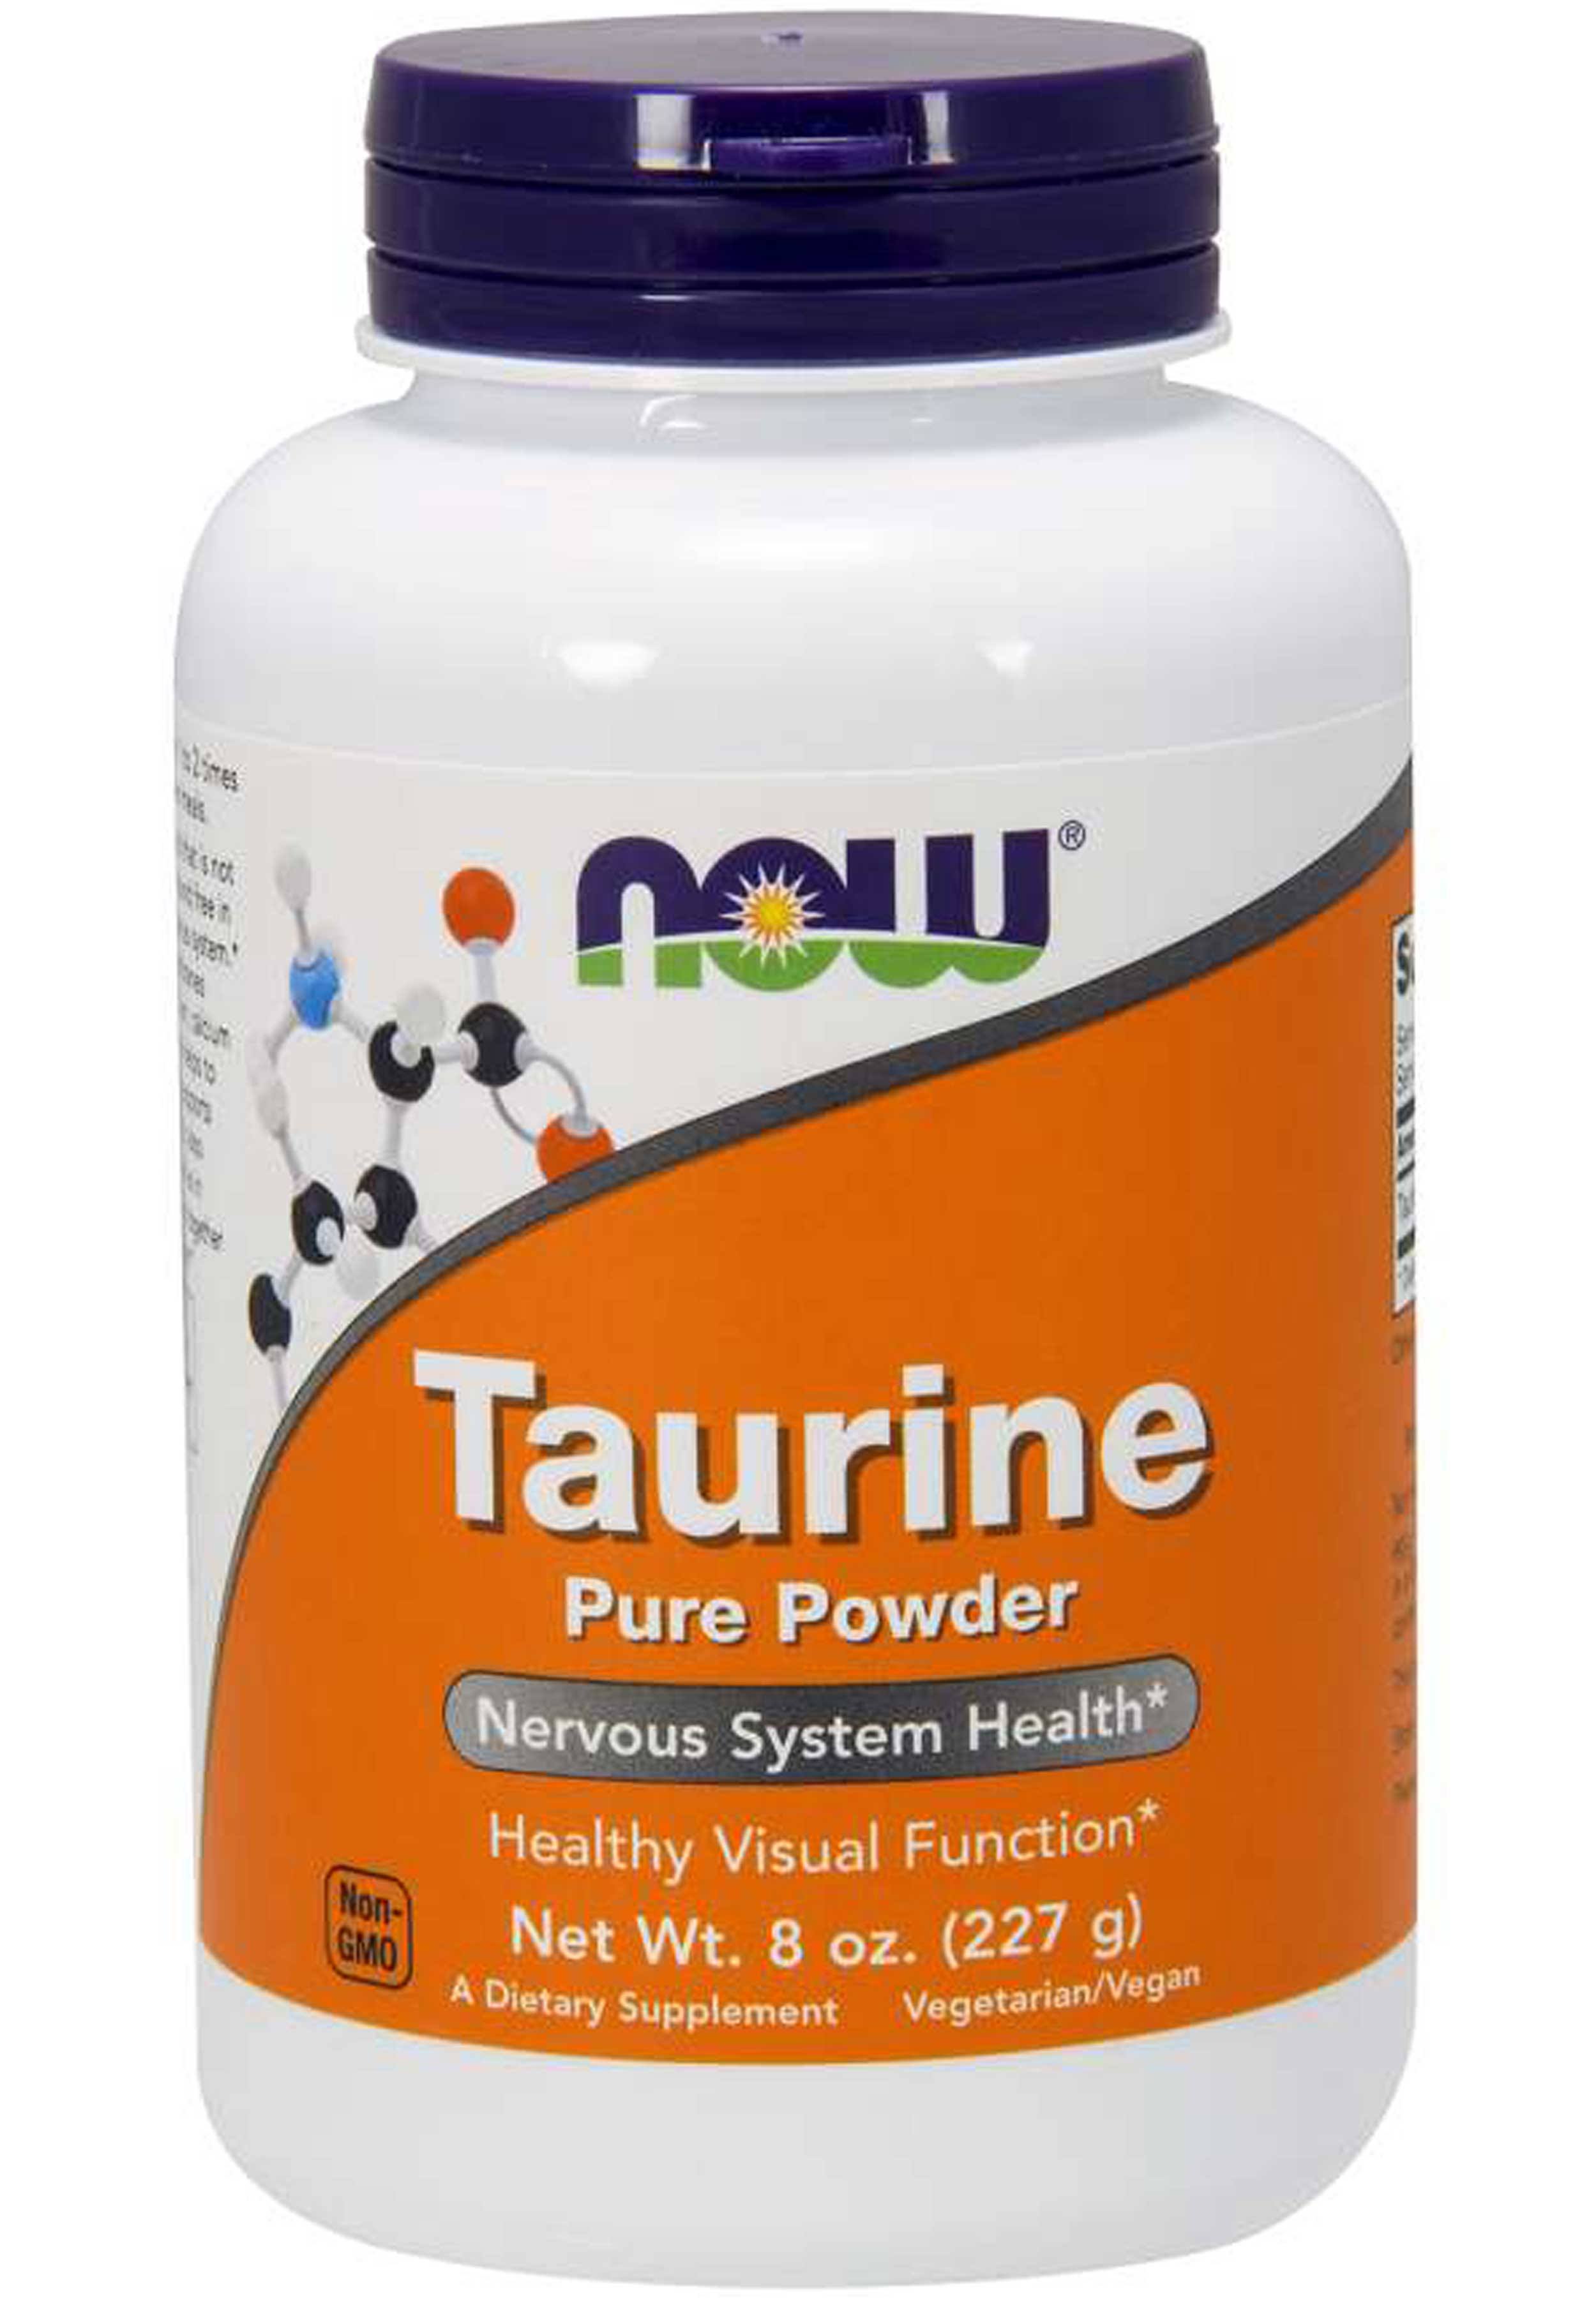 Now Foods Taurine Pure Powder - 227g